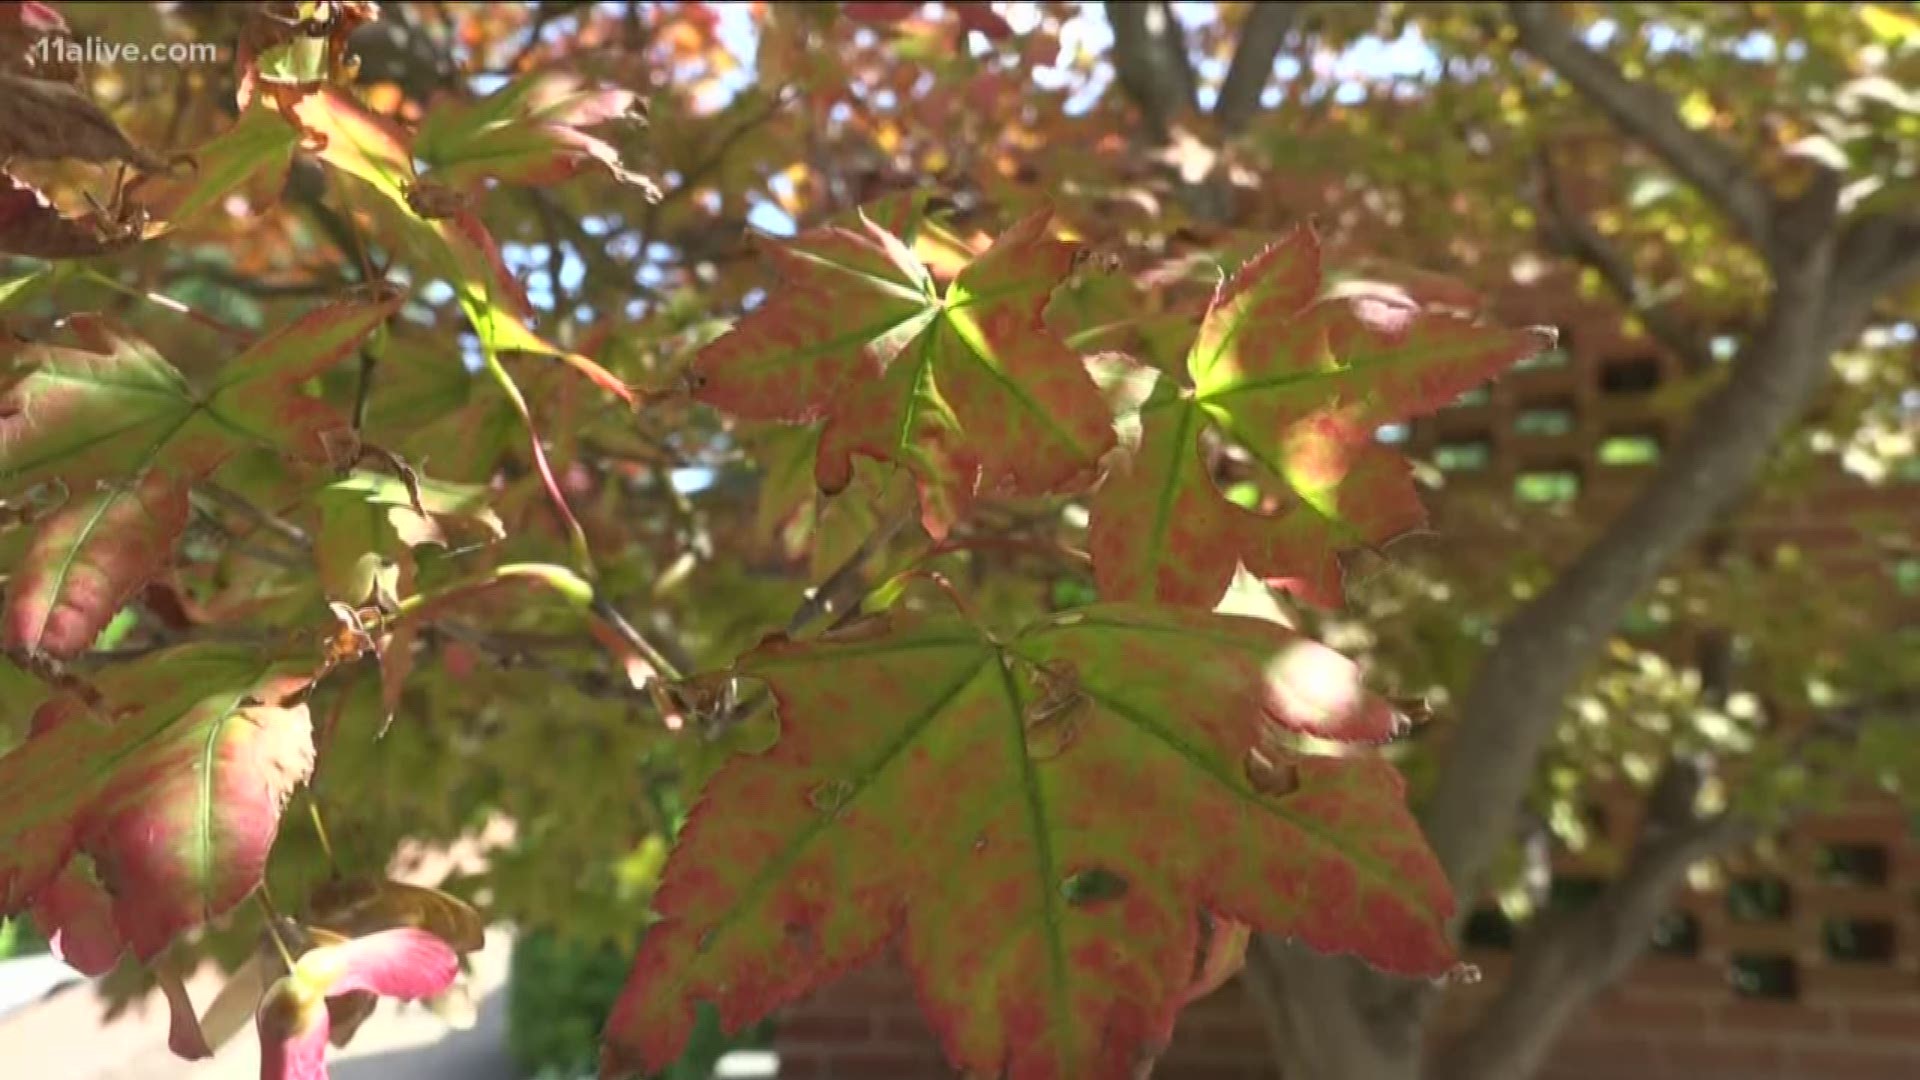 Extreme heat and drought can cause trees to go into the same survival mode they normally go into in the fall early.